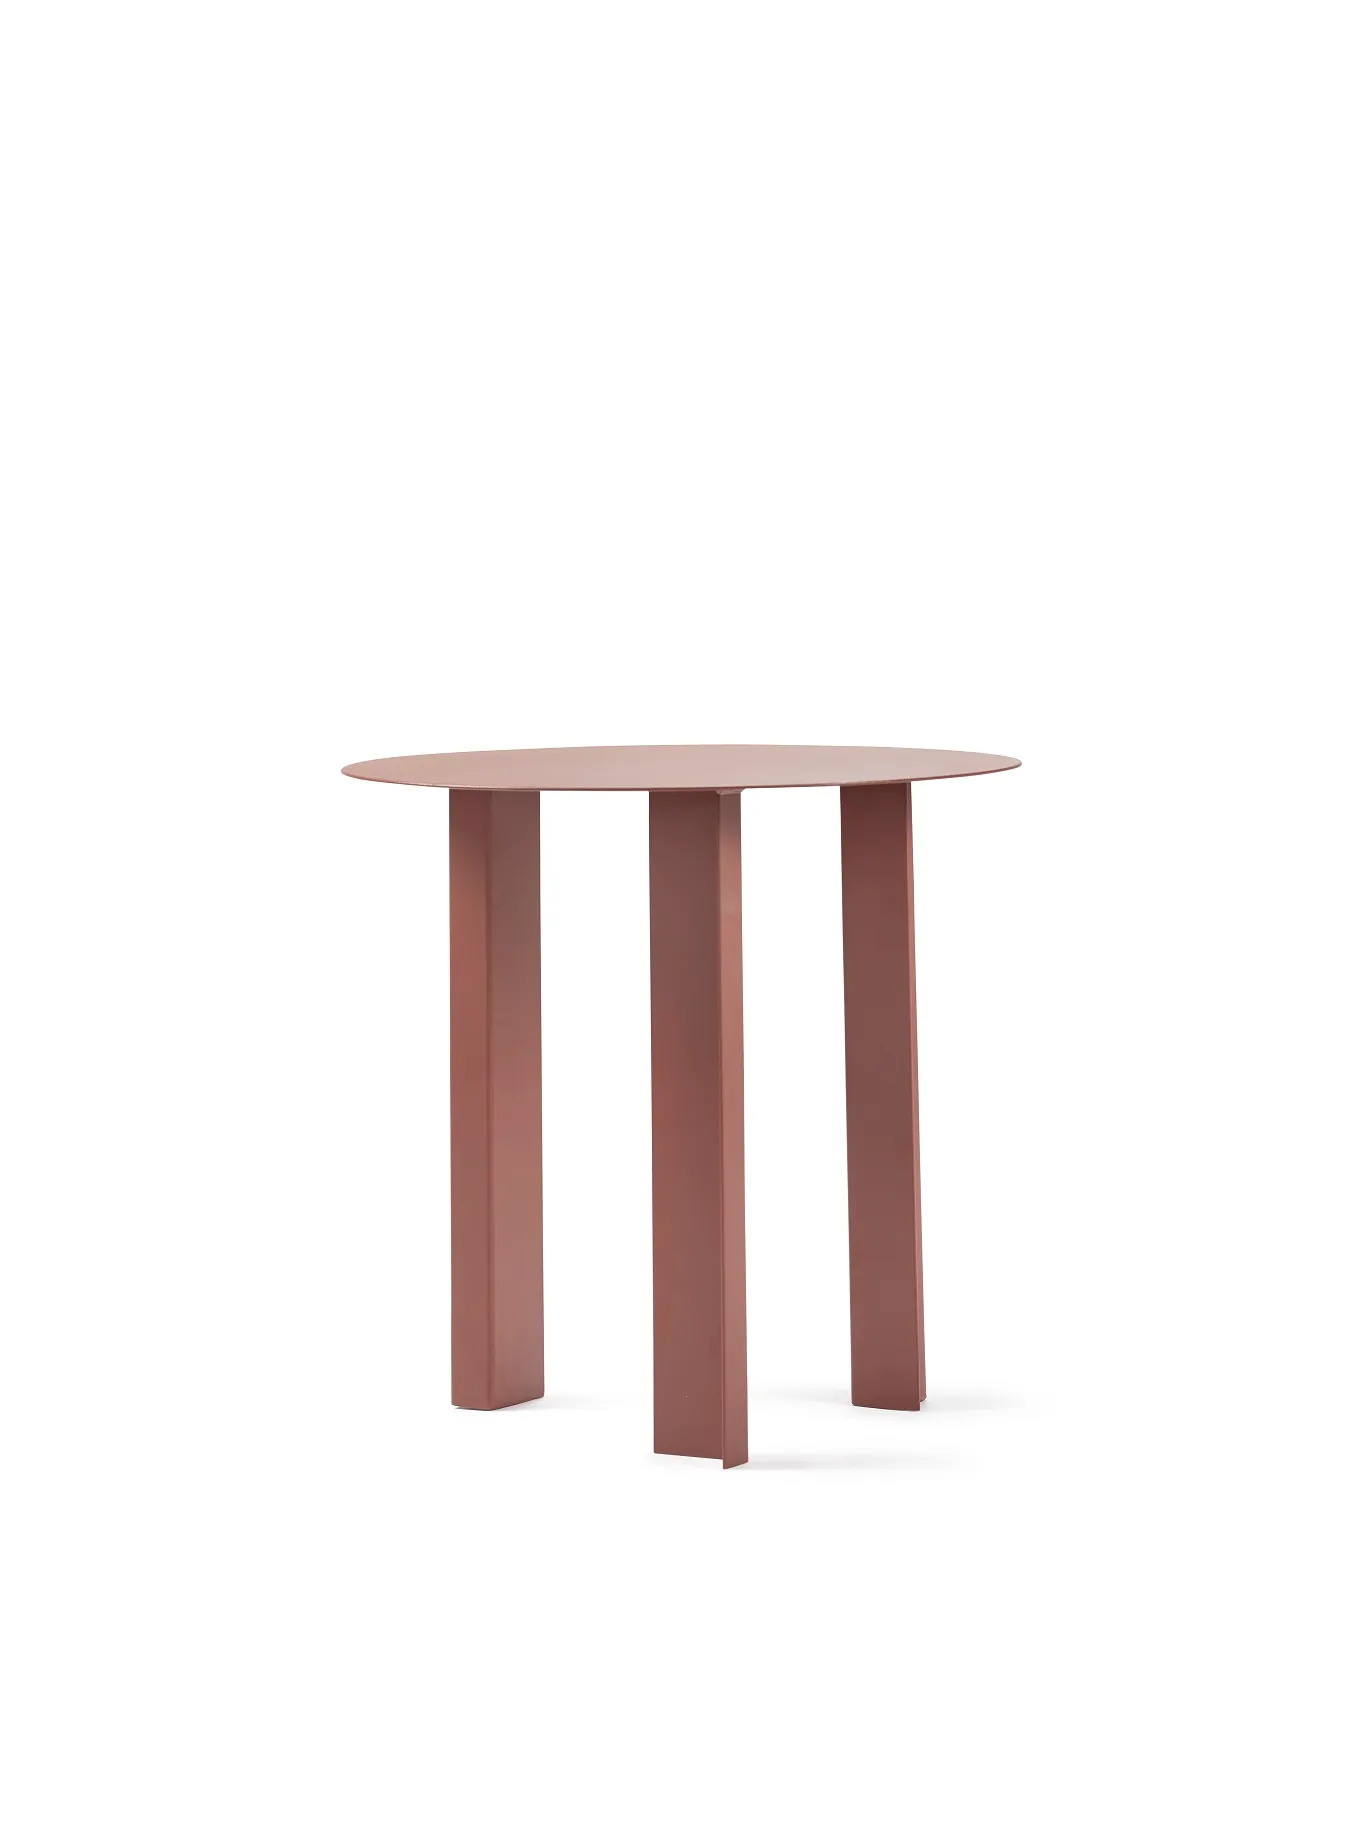 Side Table S Red Tubes L 40 W 40 H 39.5 CM Antonino Sciortino by Serax